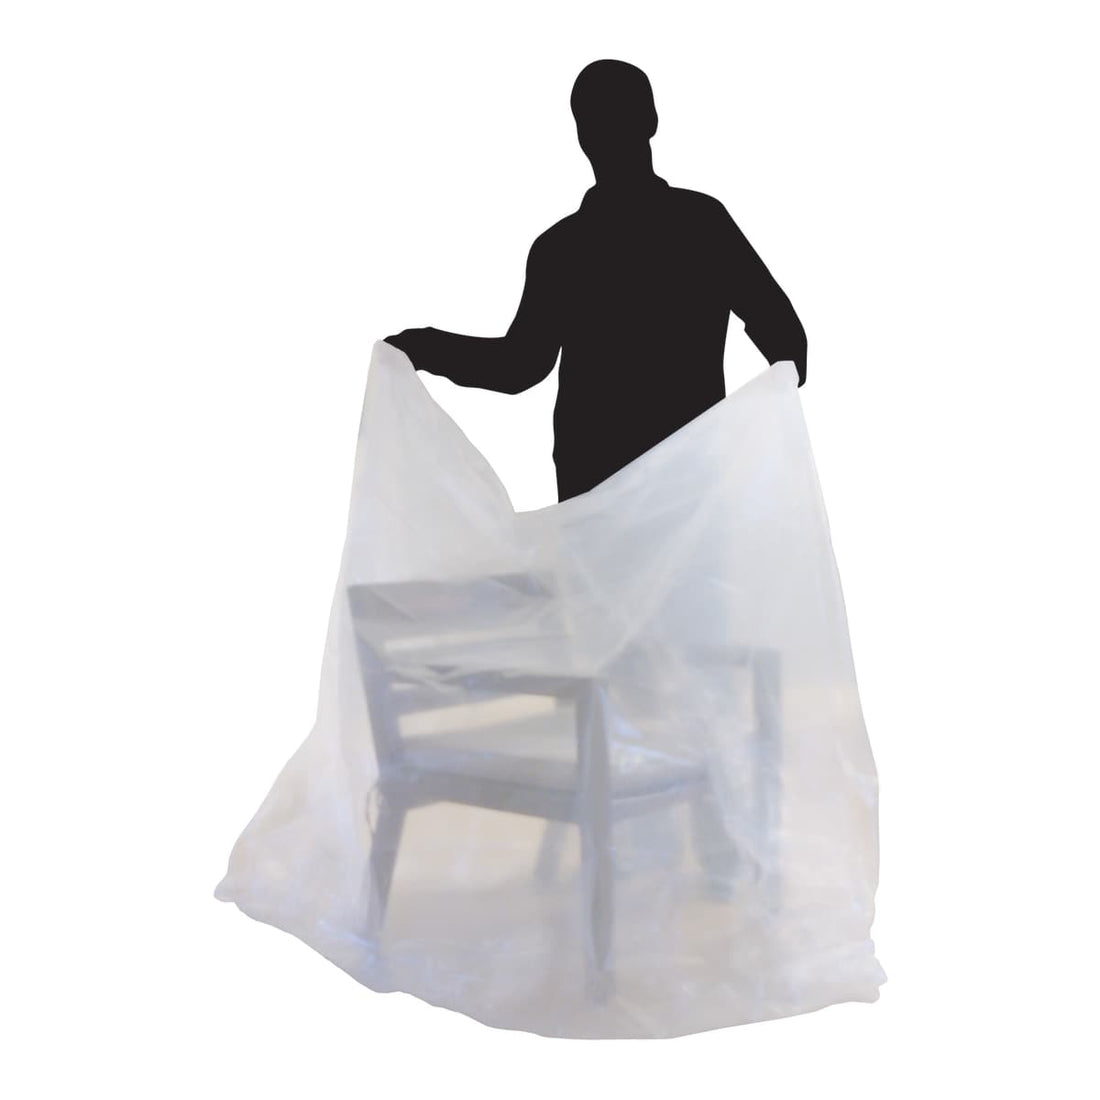 POLYPROPYLENE TRANSPARENT POLYPROPYLENE PROTECTION COVER FOR CHAIR OR CHAIR L130xD110CM - best price from Maltashopper.com BR410002396